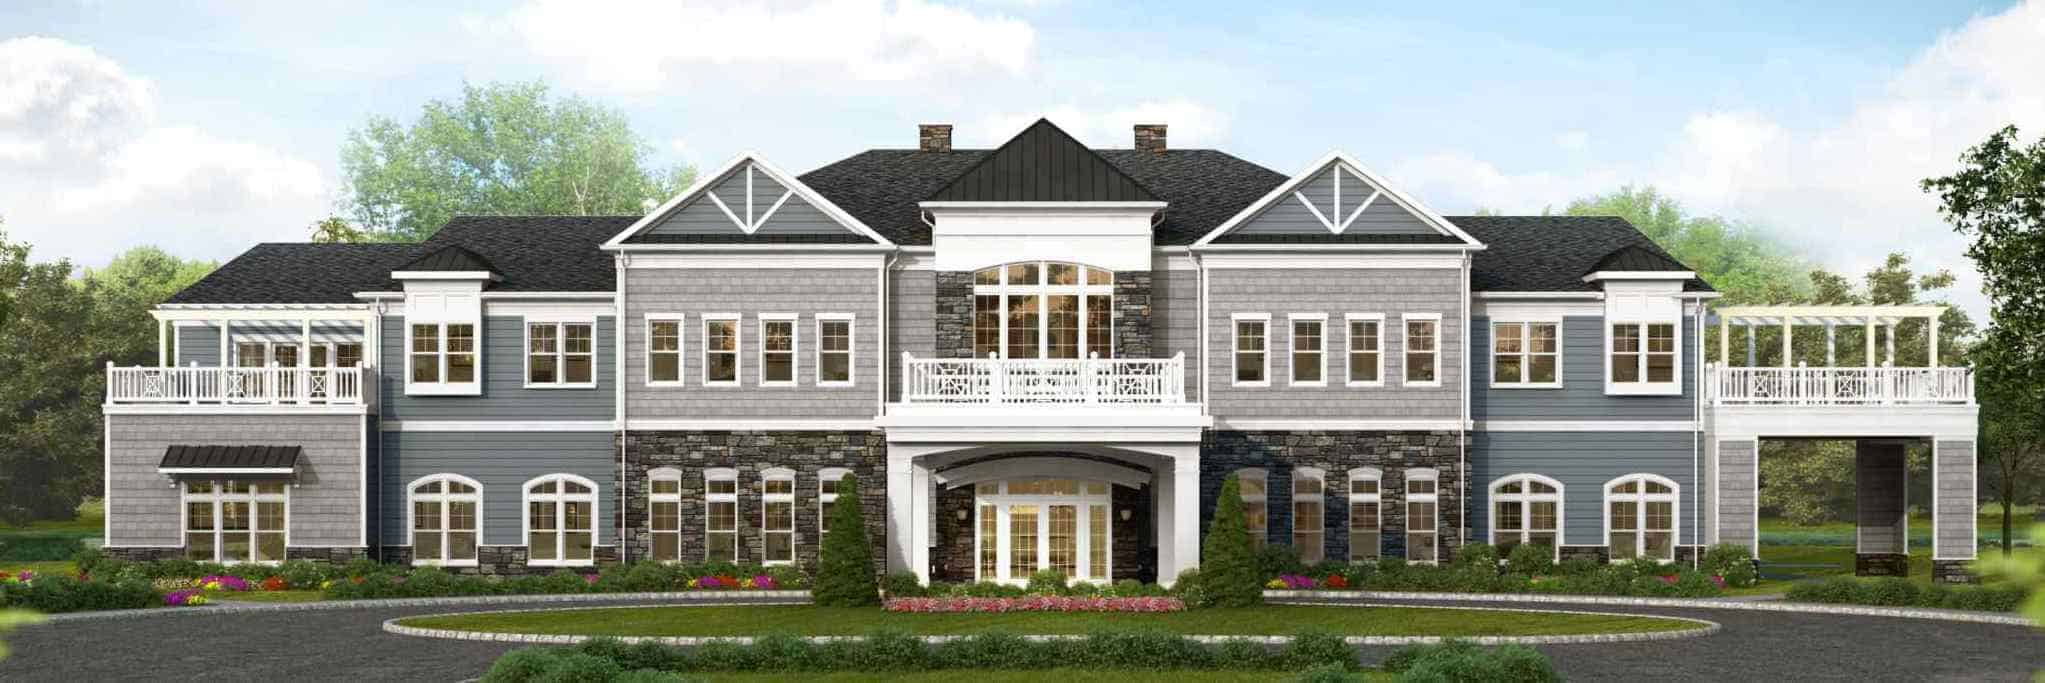 Country Pointe luxury condos, villas, townhomes, Plainview NY